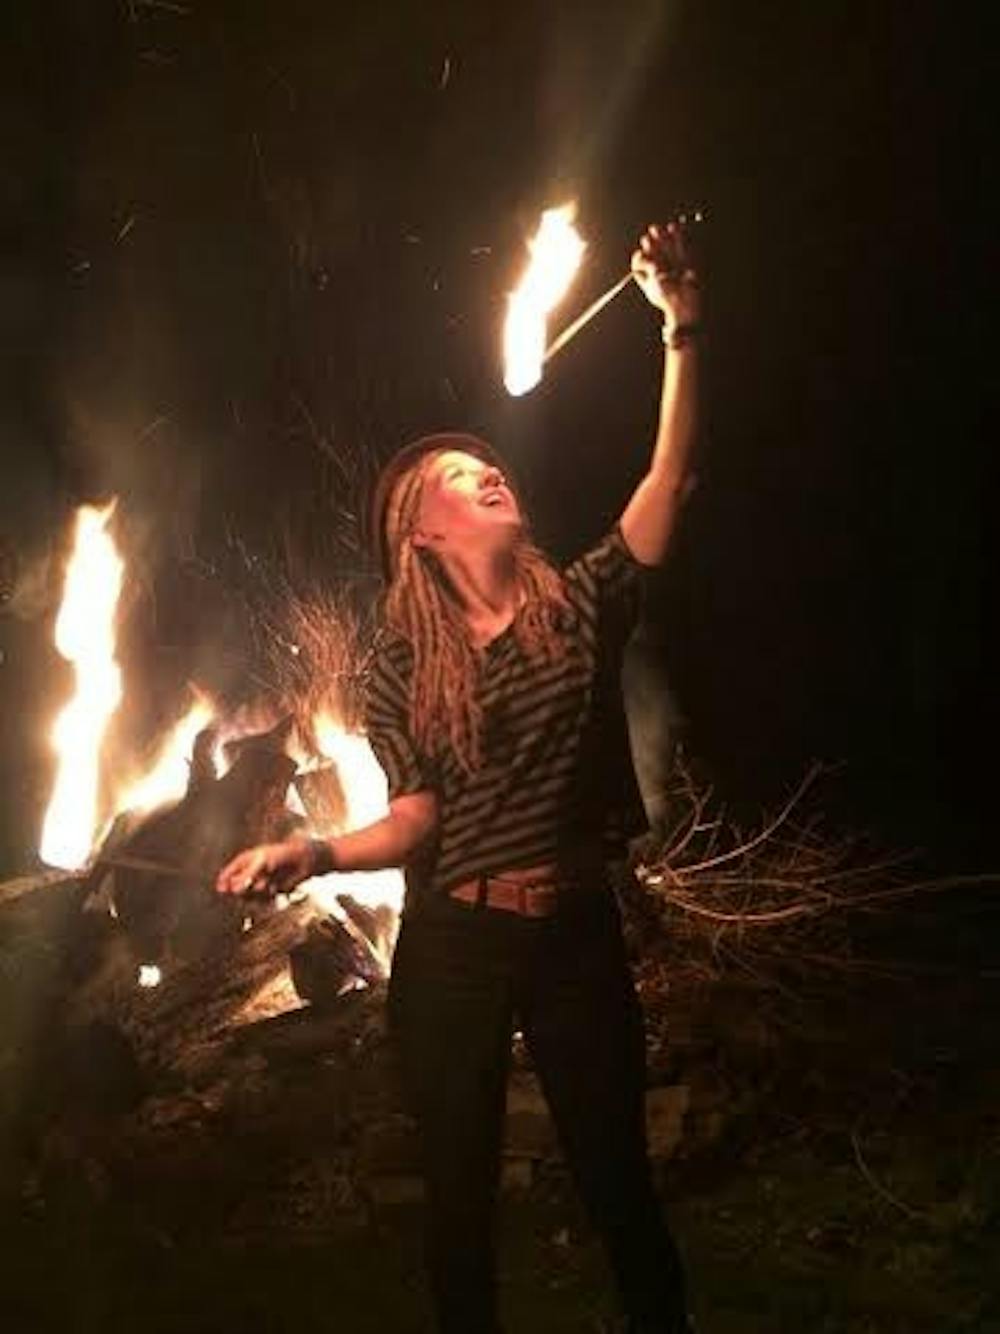 Alumna Kelzie Jo Selch prepares to "eat" fire. Selch and other flow artists perform on Mondays at Be Here Now. PHOTO PROVIDED BY KELZIE JO SELCH